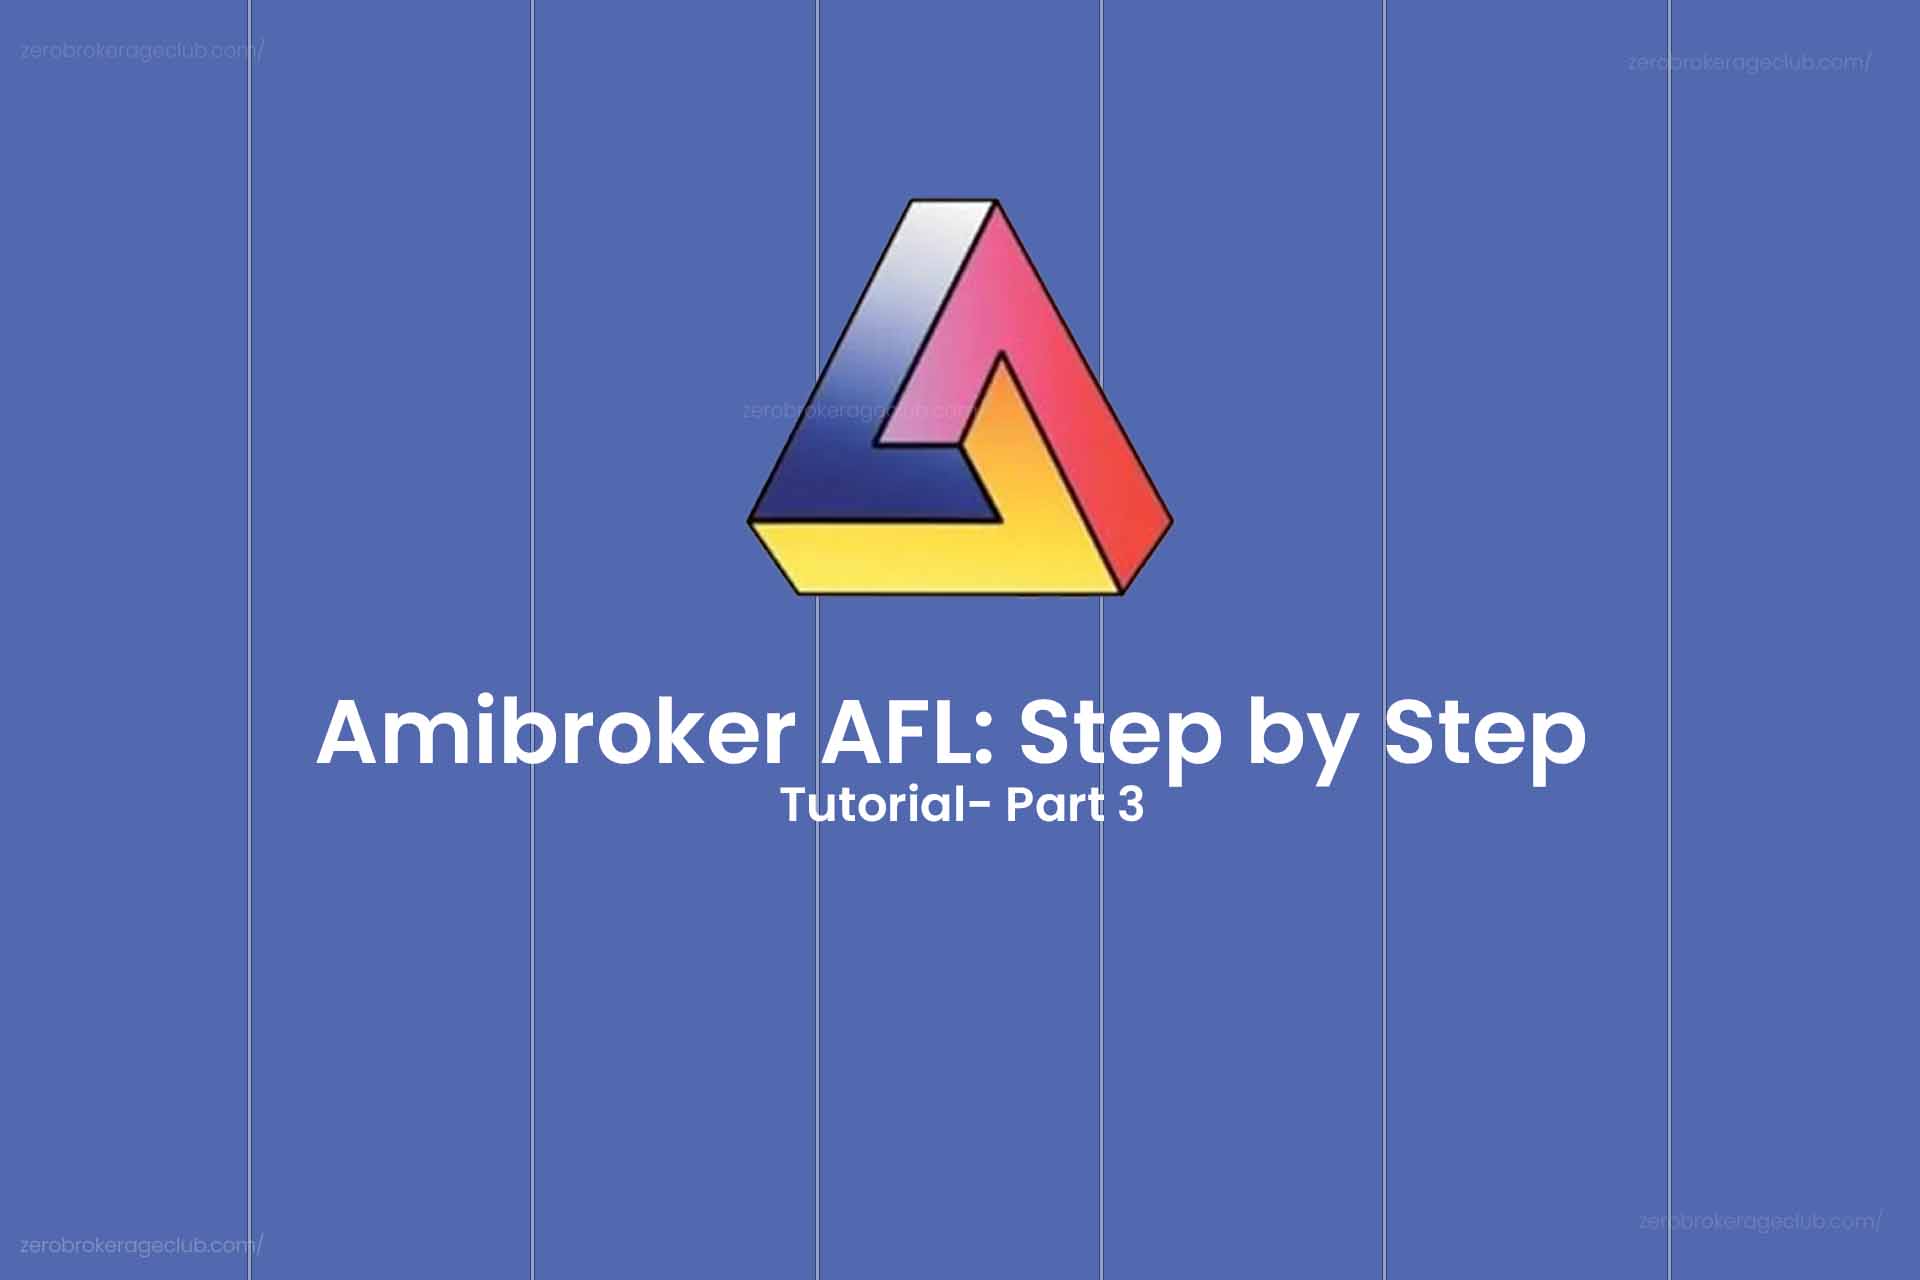 Amibroker AFL: Step by Step Tutorial- Part 3